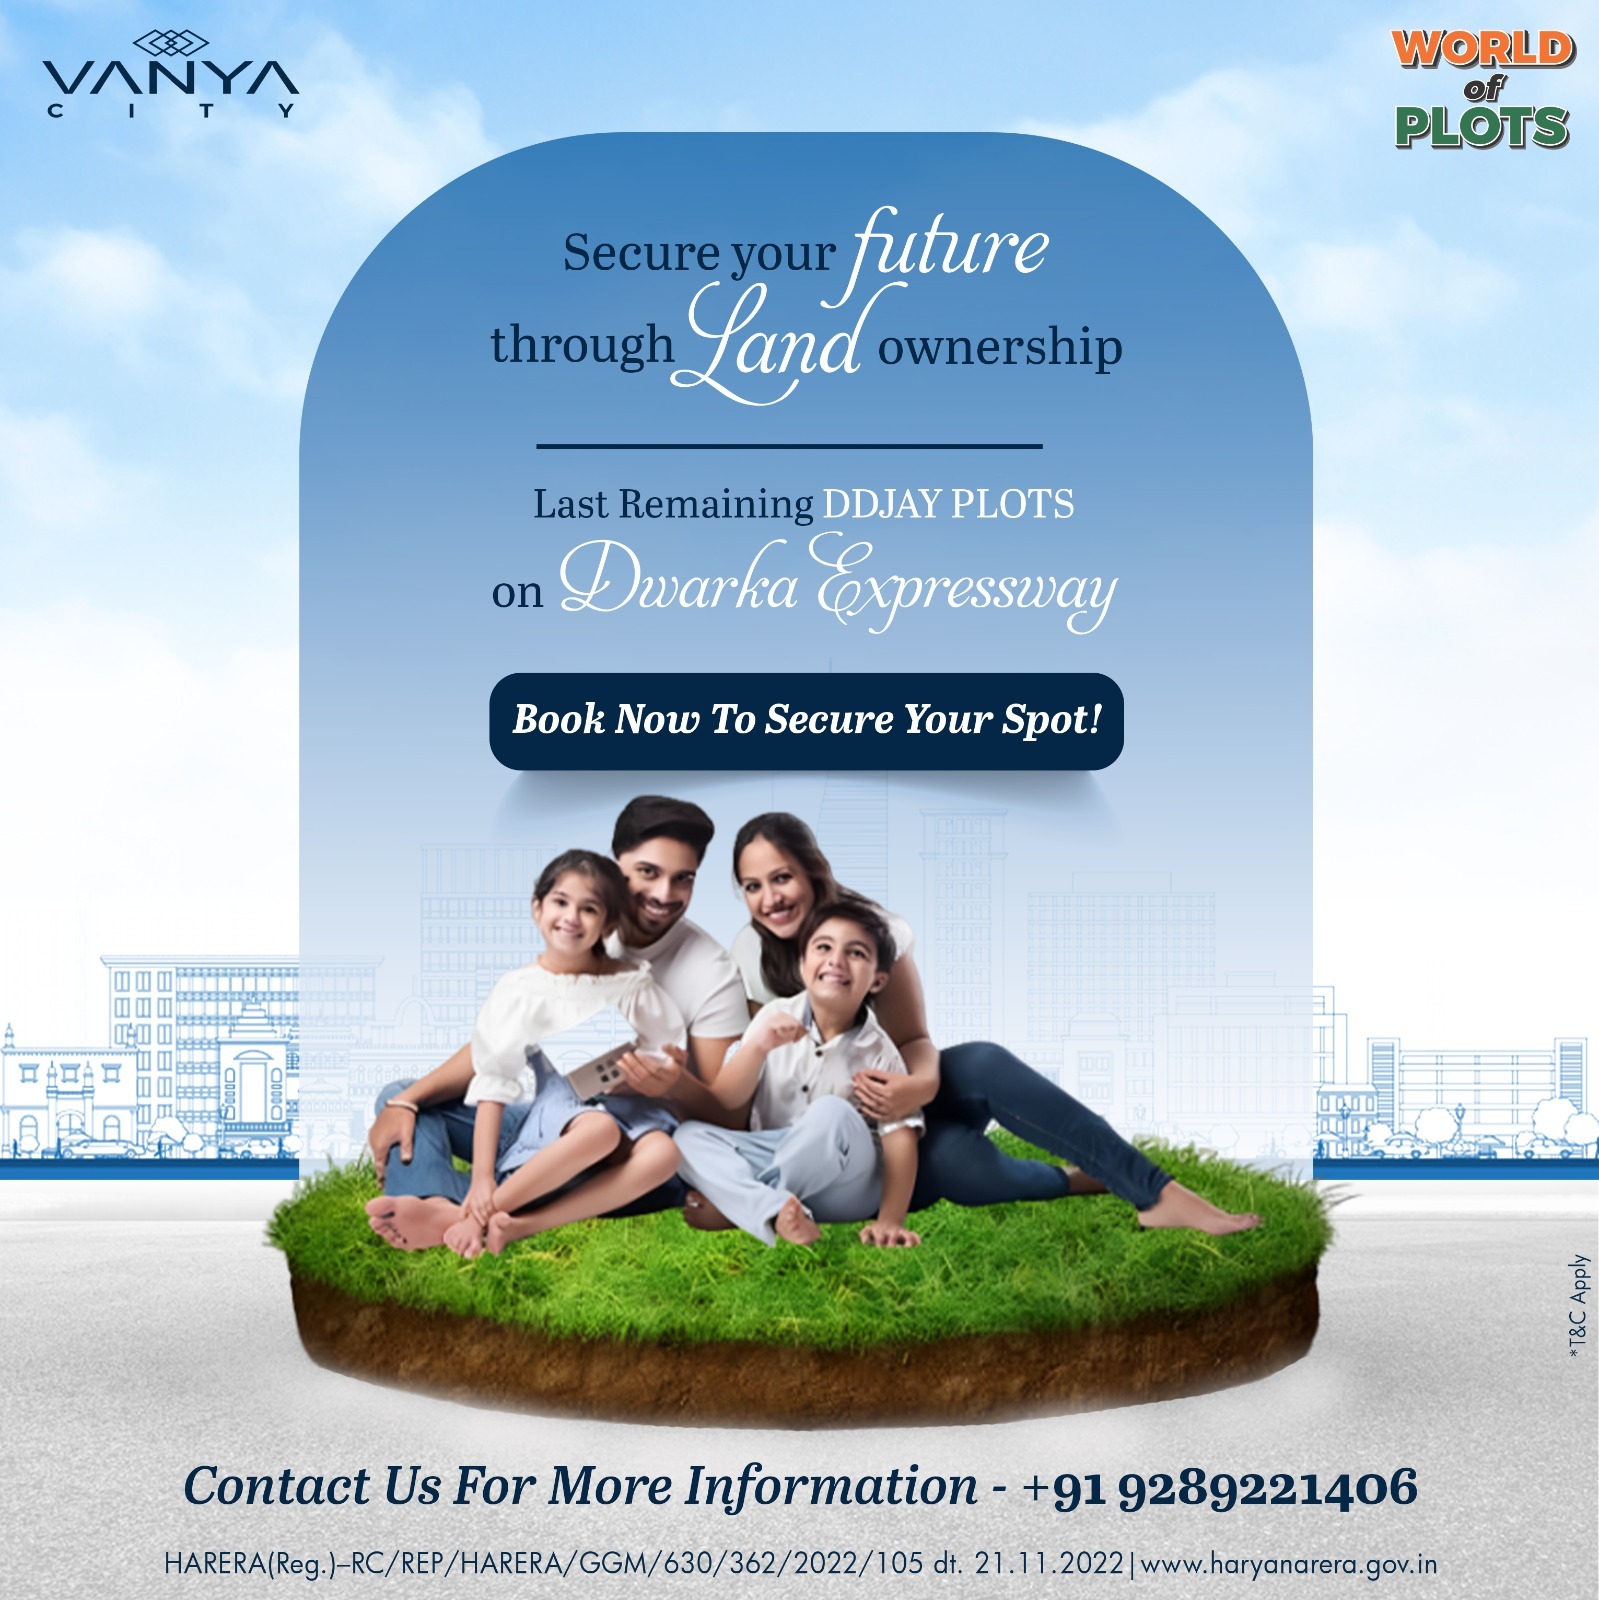 Vanya City: Crafting Foundations for Tomorrow on Dwarka Expressway Update